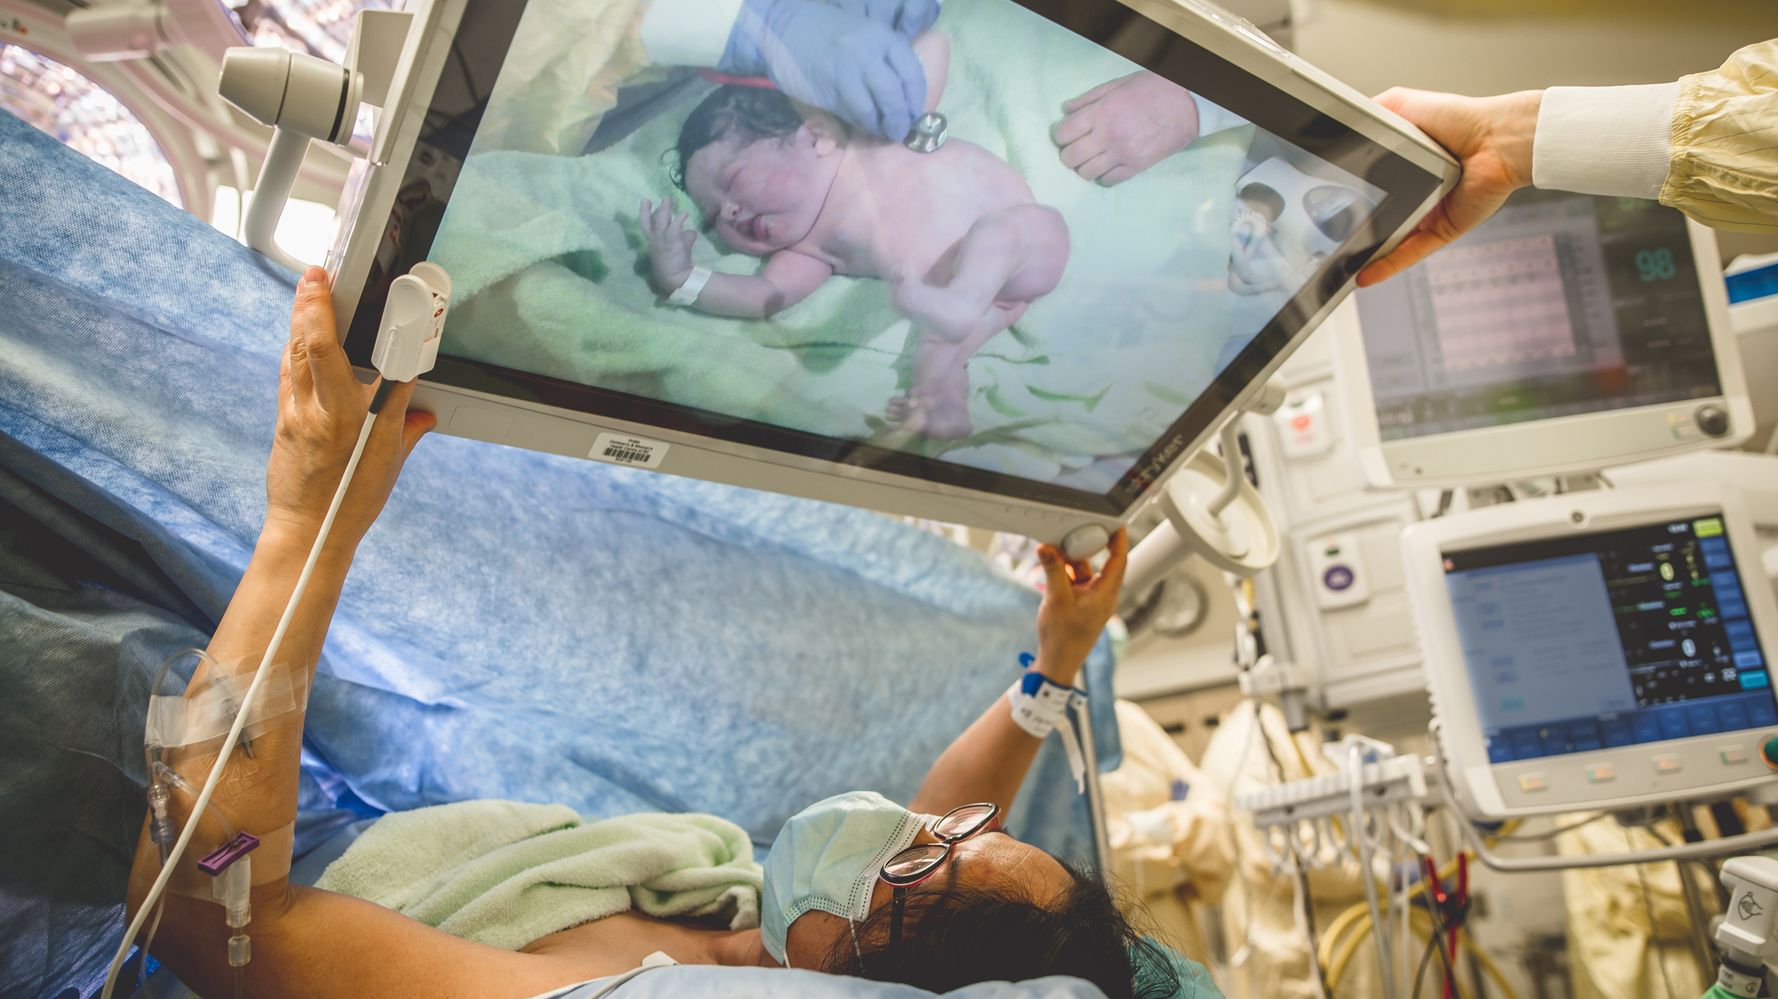 18 Stunning Birth Photos That Show The Power Of C-Section Moms